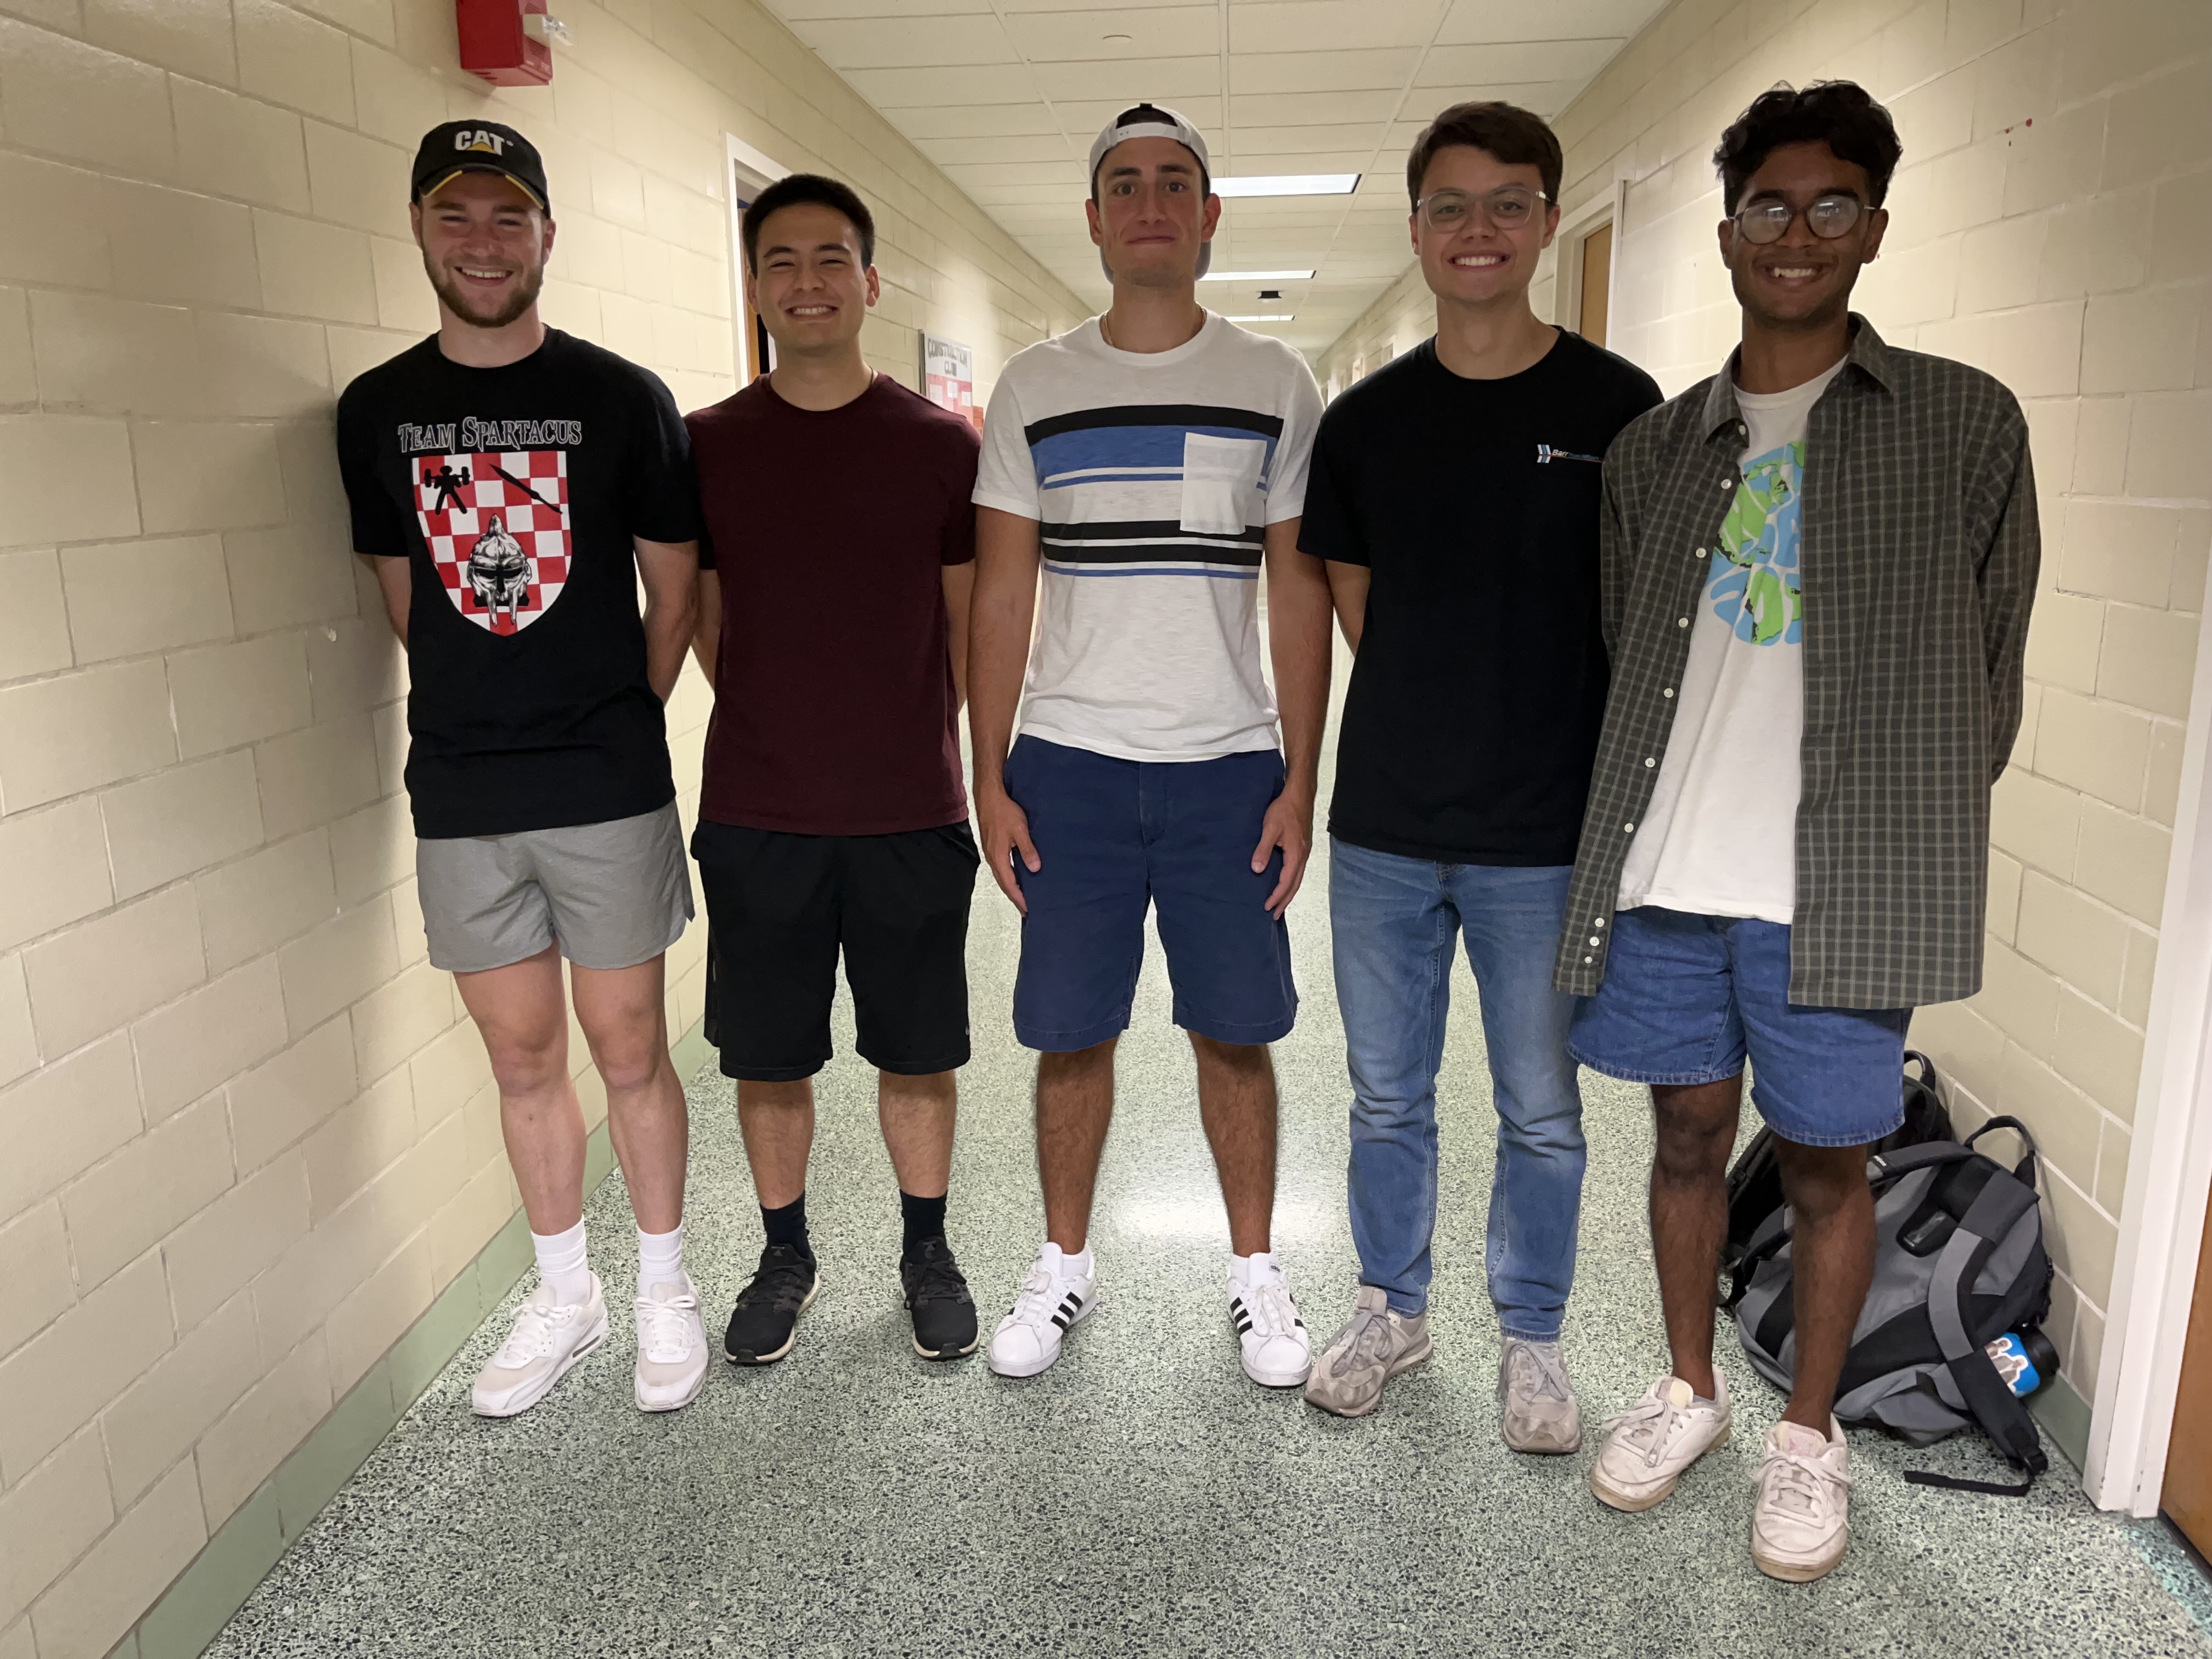 Team members pictured from left to right: Connor Phipps, Michael Chiariello, Giovanni Militello, Elijah McCoy, Dhruv Biswas